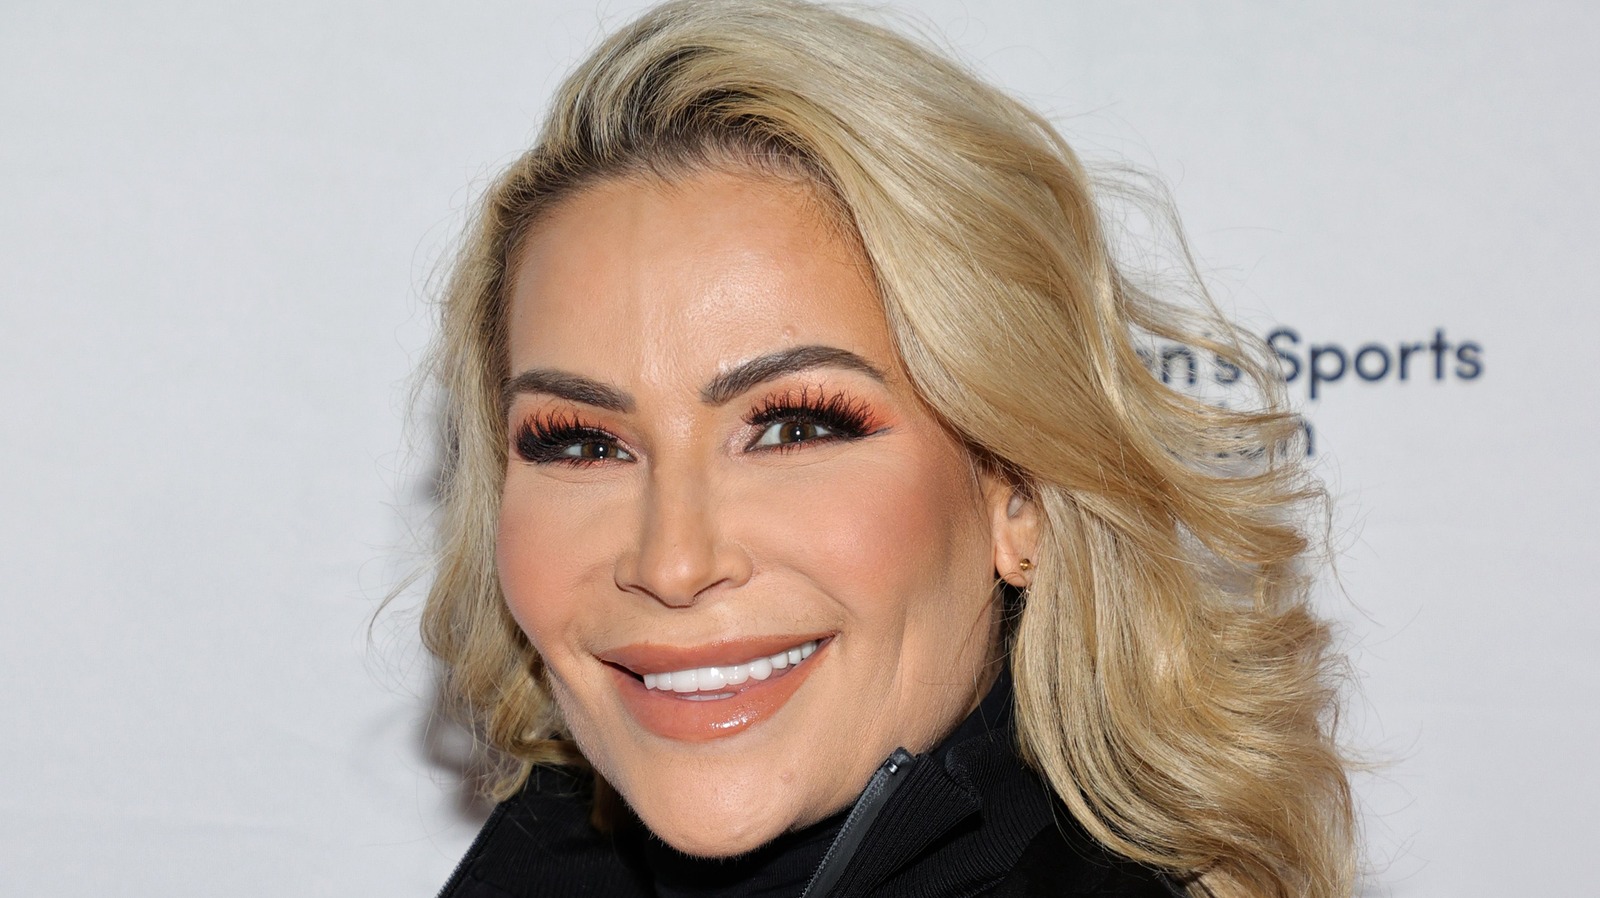 Natalya Recalls Training Ronda Rousey And Getting Promo Tips From WWE Hall Of Famer